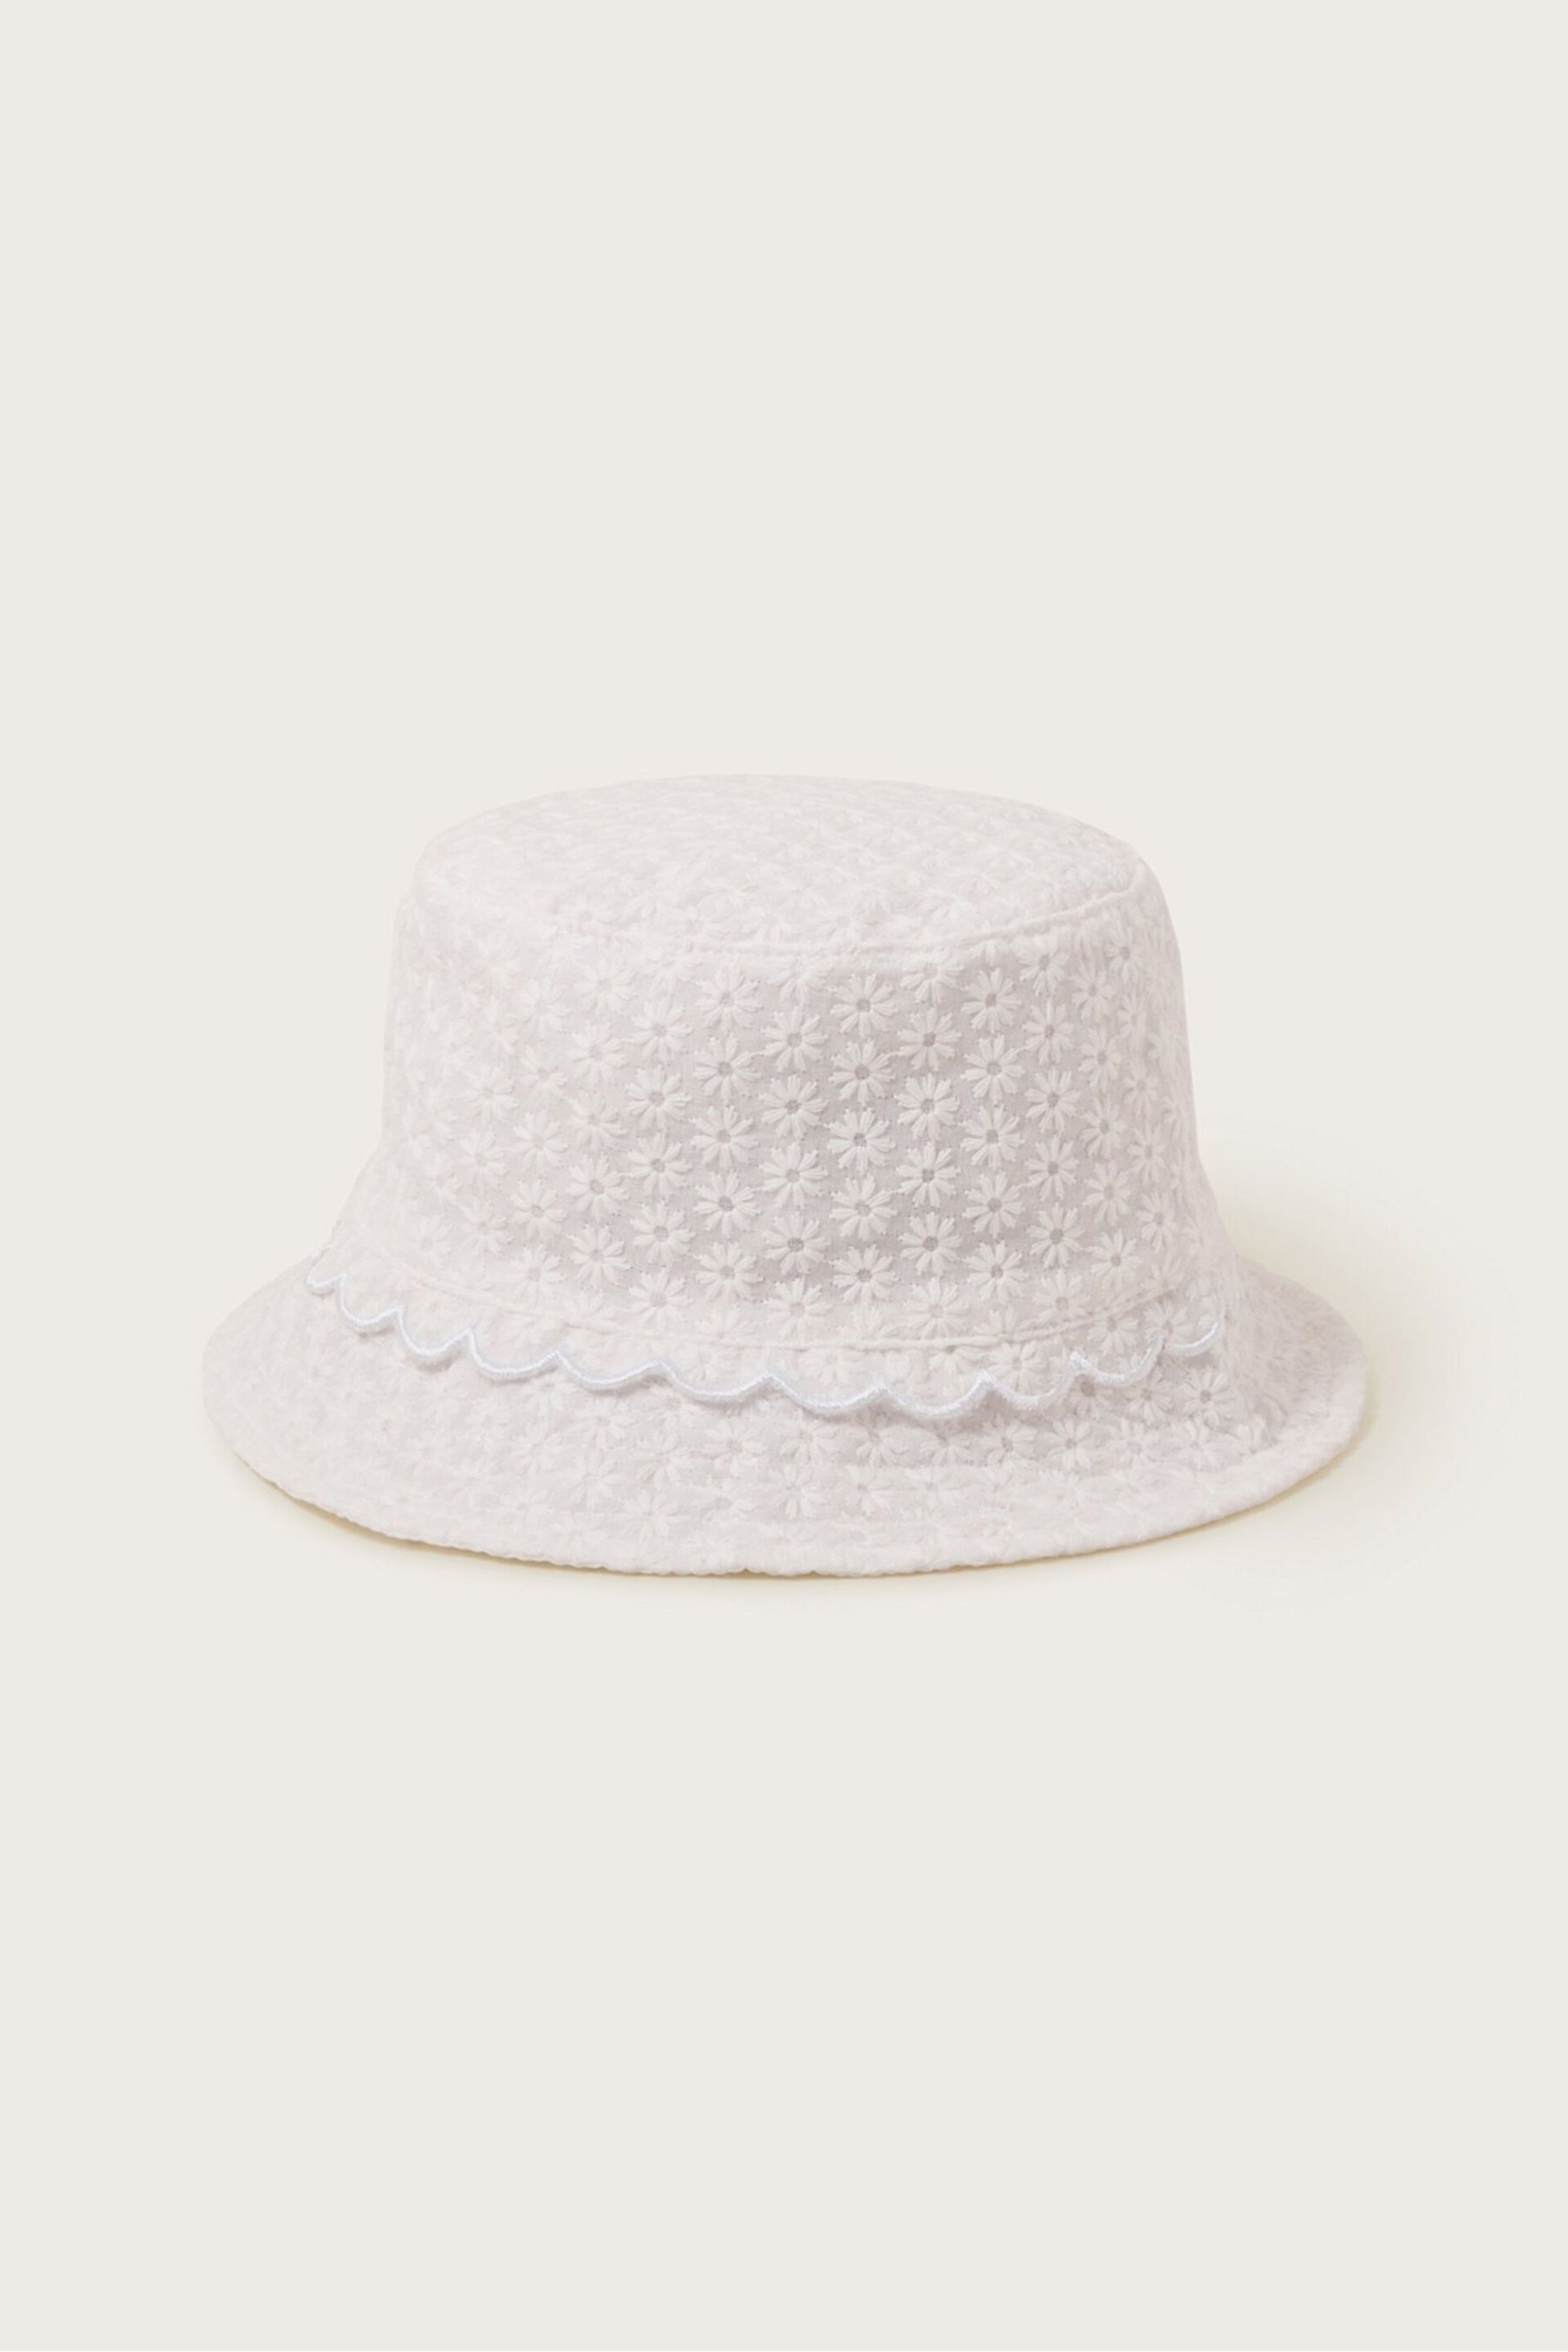 Monsoon Natural Pineapple Ombre Cap - Image 1 of 2